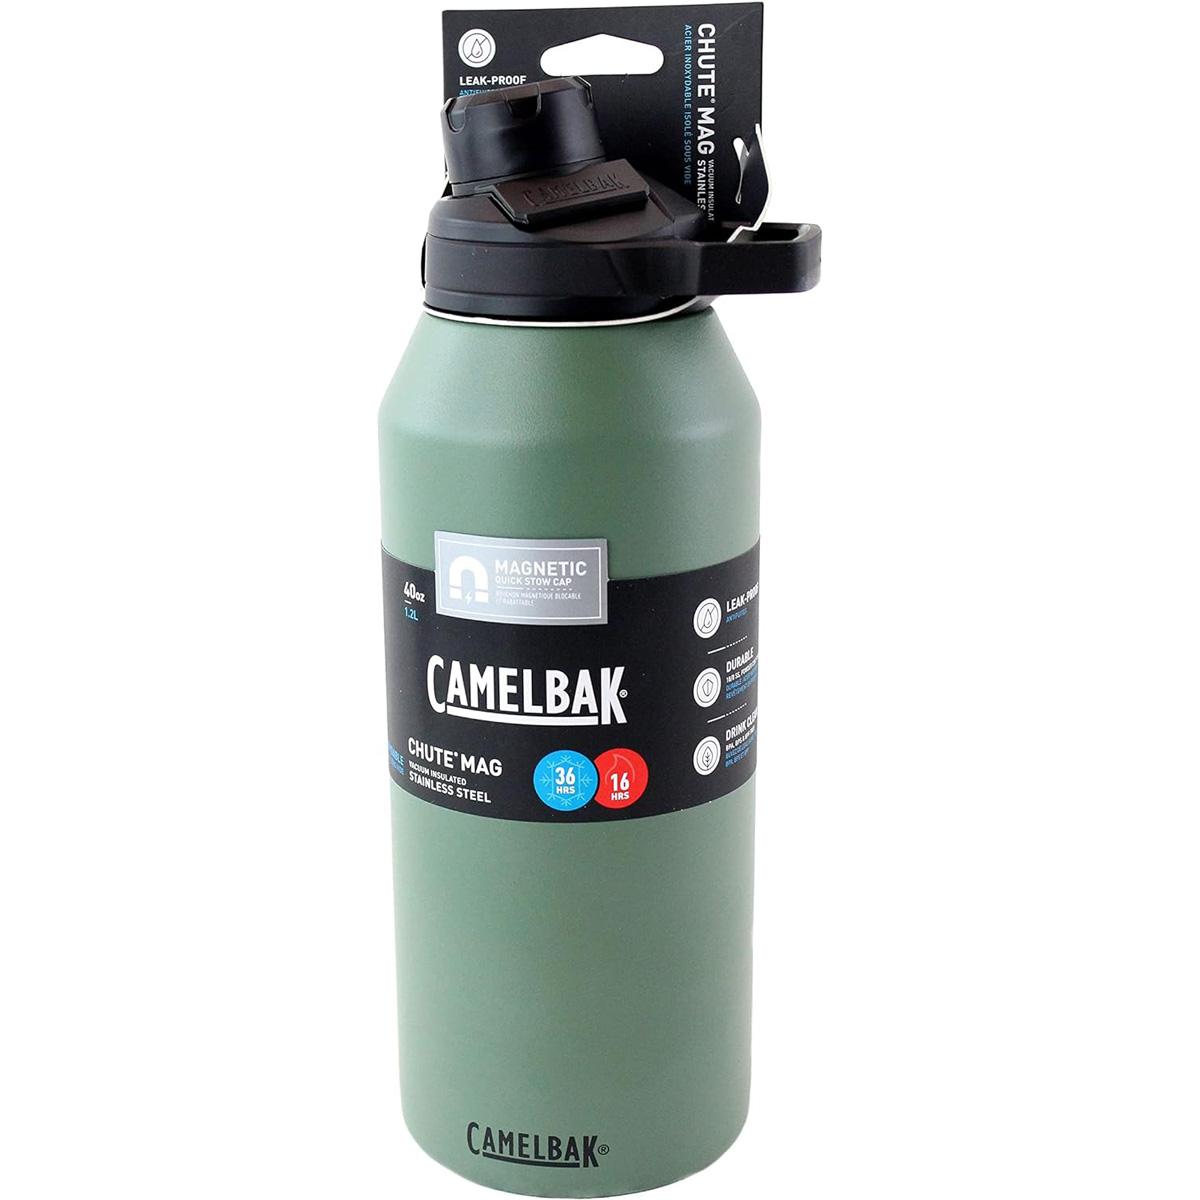 CamelBak Chute Mag Vacuum Insulated Stainless Steel 40oz Water Bottle for $23.49